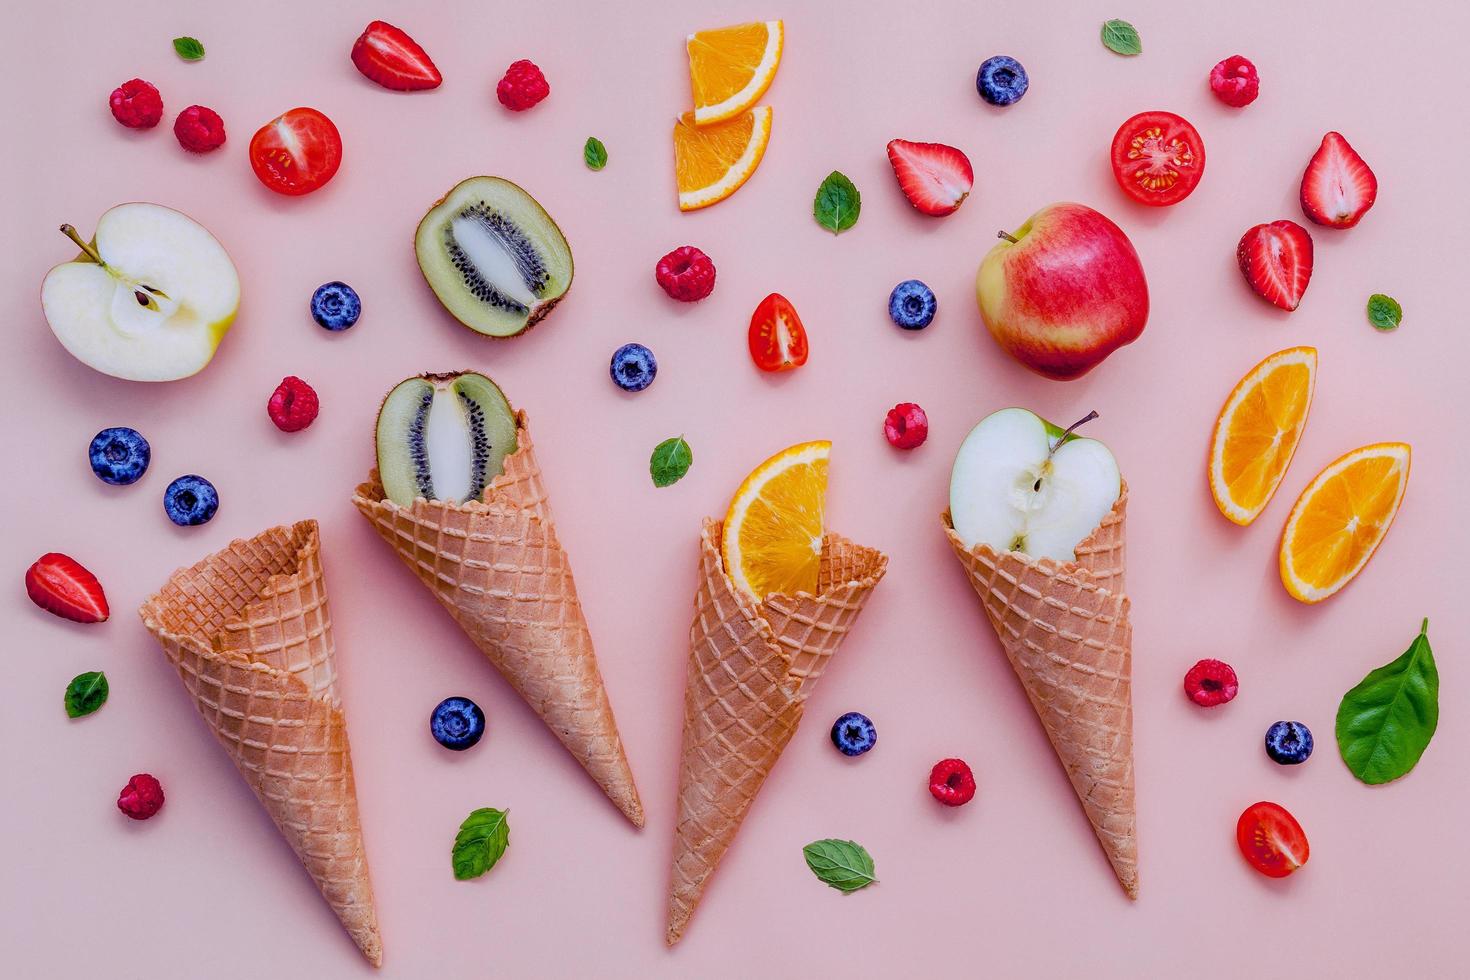 Ice cream cones and fruit on a pink background photo